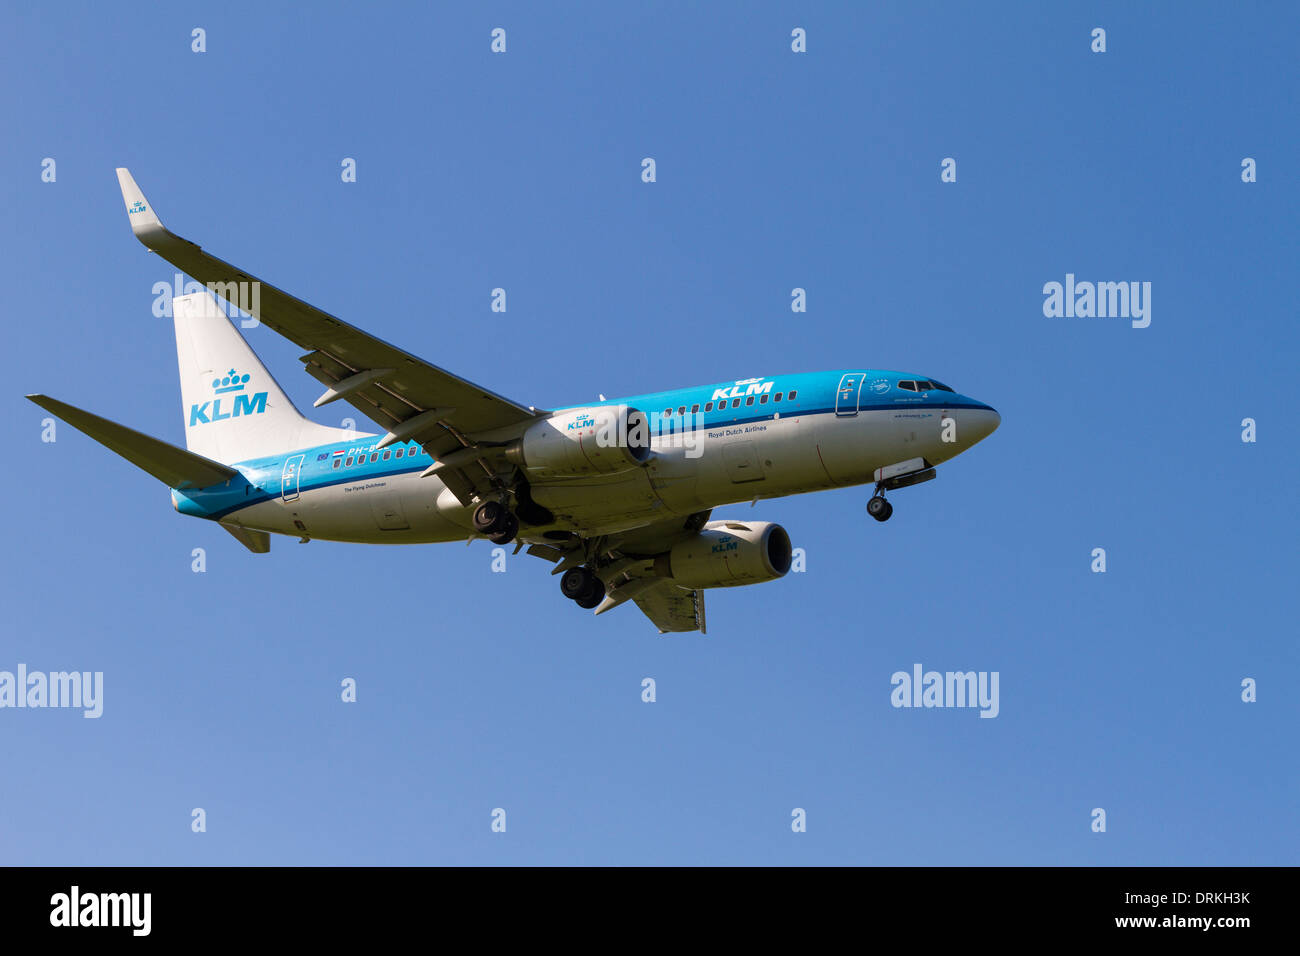 KLM Boeing 737 to land Stock Photo